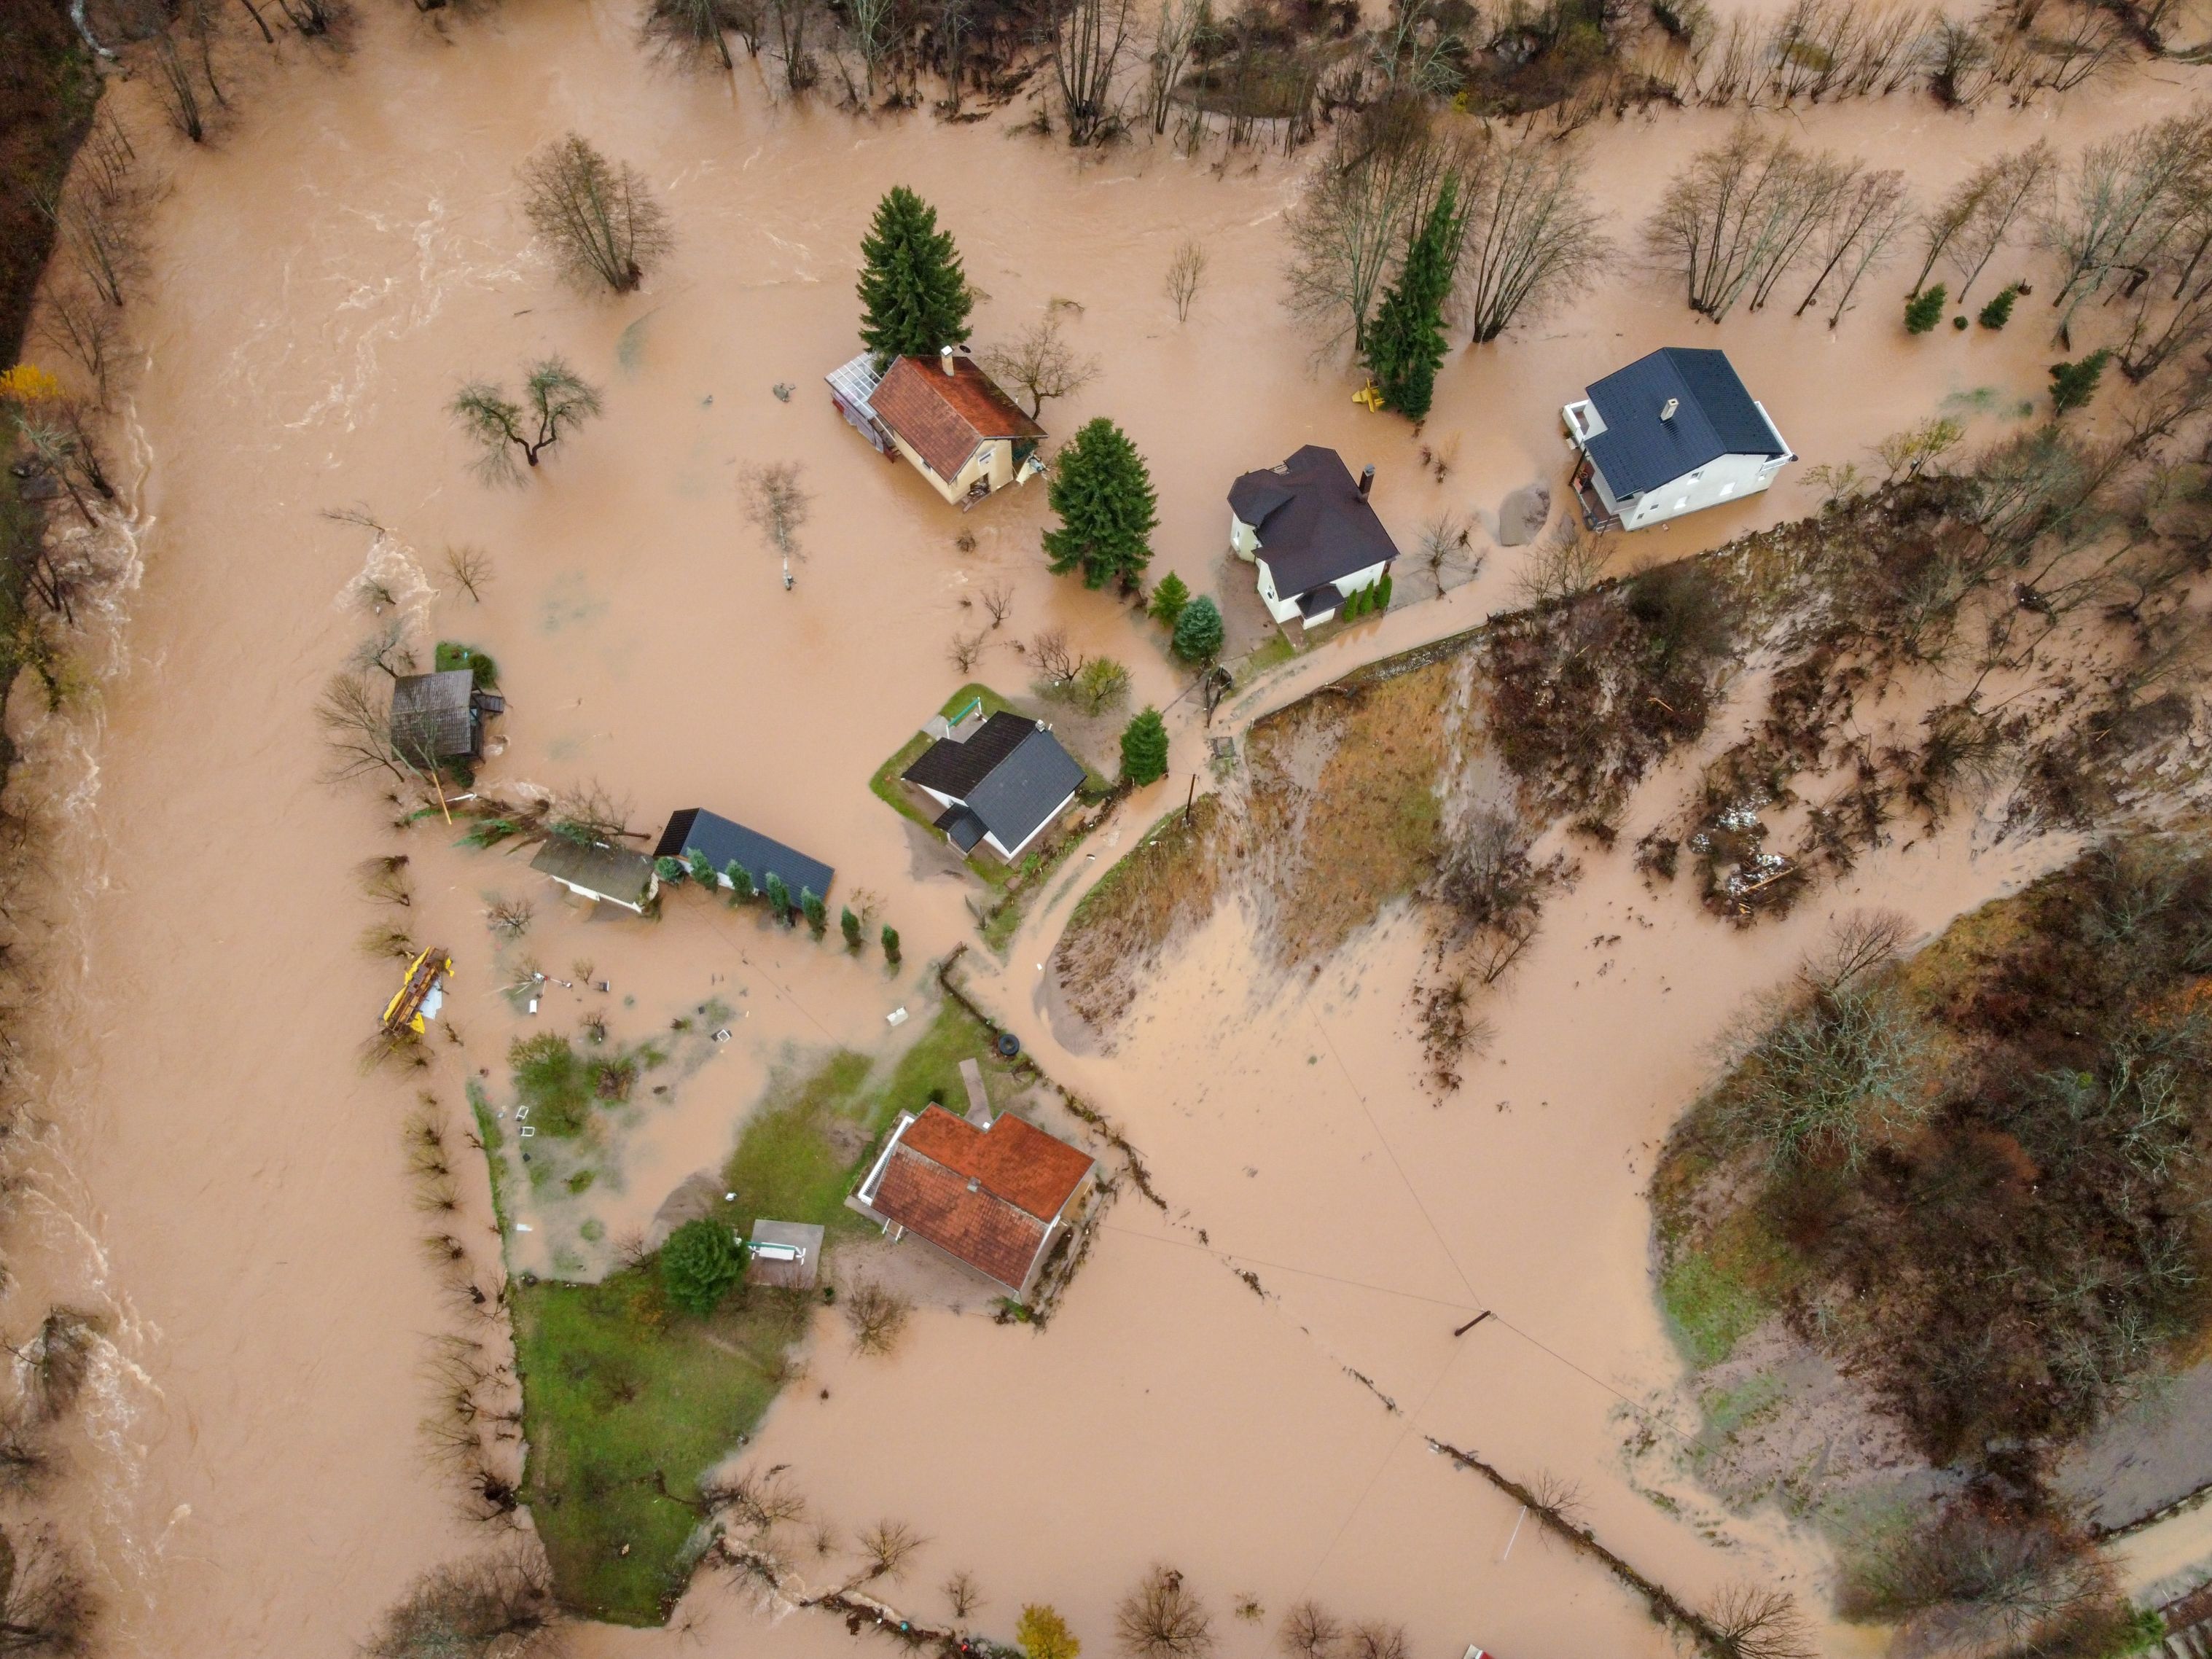 Flooded village, fields, farms and houses, aerial drone view. Aftermath of devastating river flood and landslide. Catastrophic floods. Overflowing river, view from above.